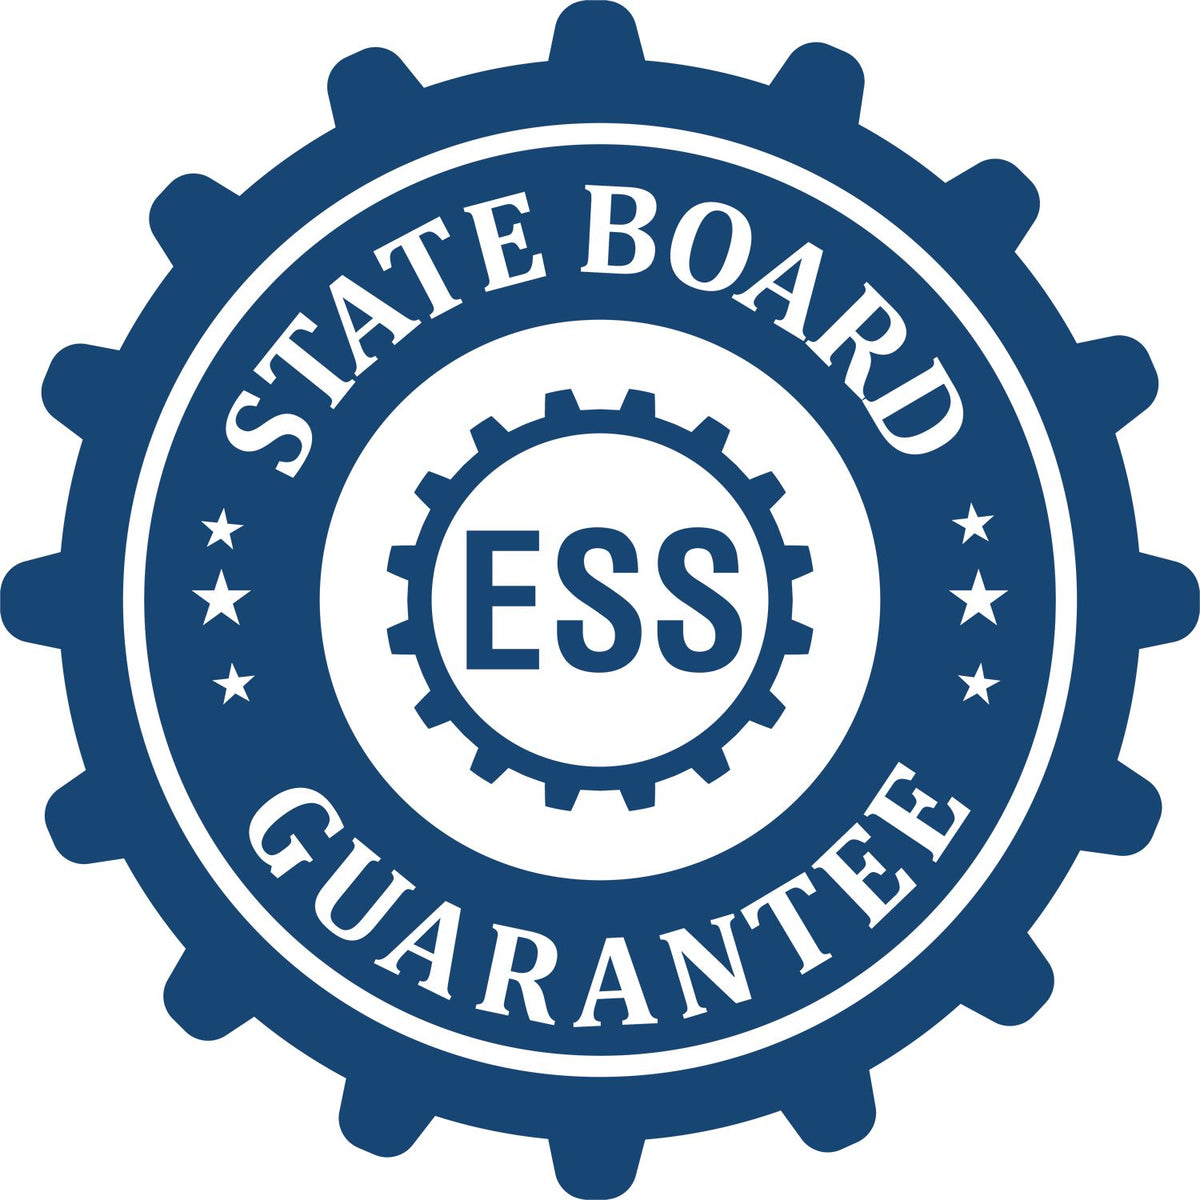 An emblem in a gear shape illustrating a state board guarantee for the State of Guam Extended Long Reach Engineer Seal product.